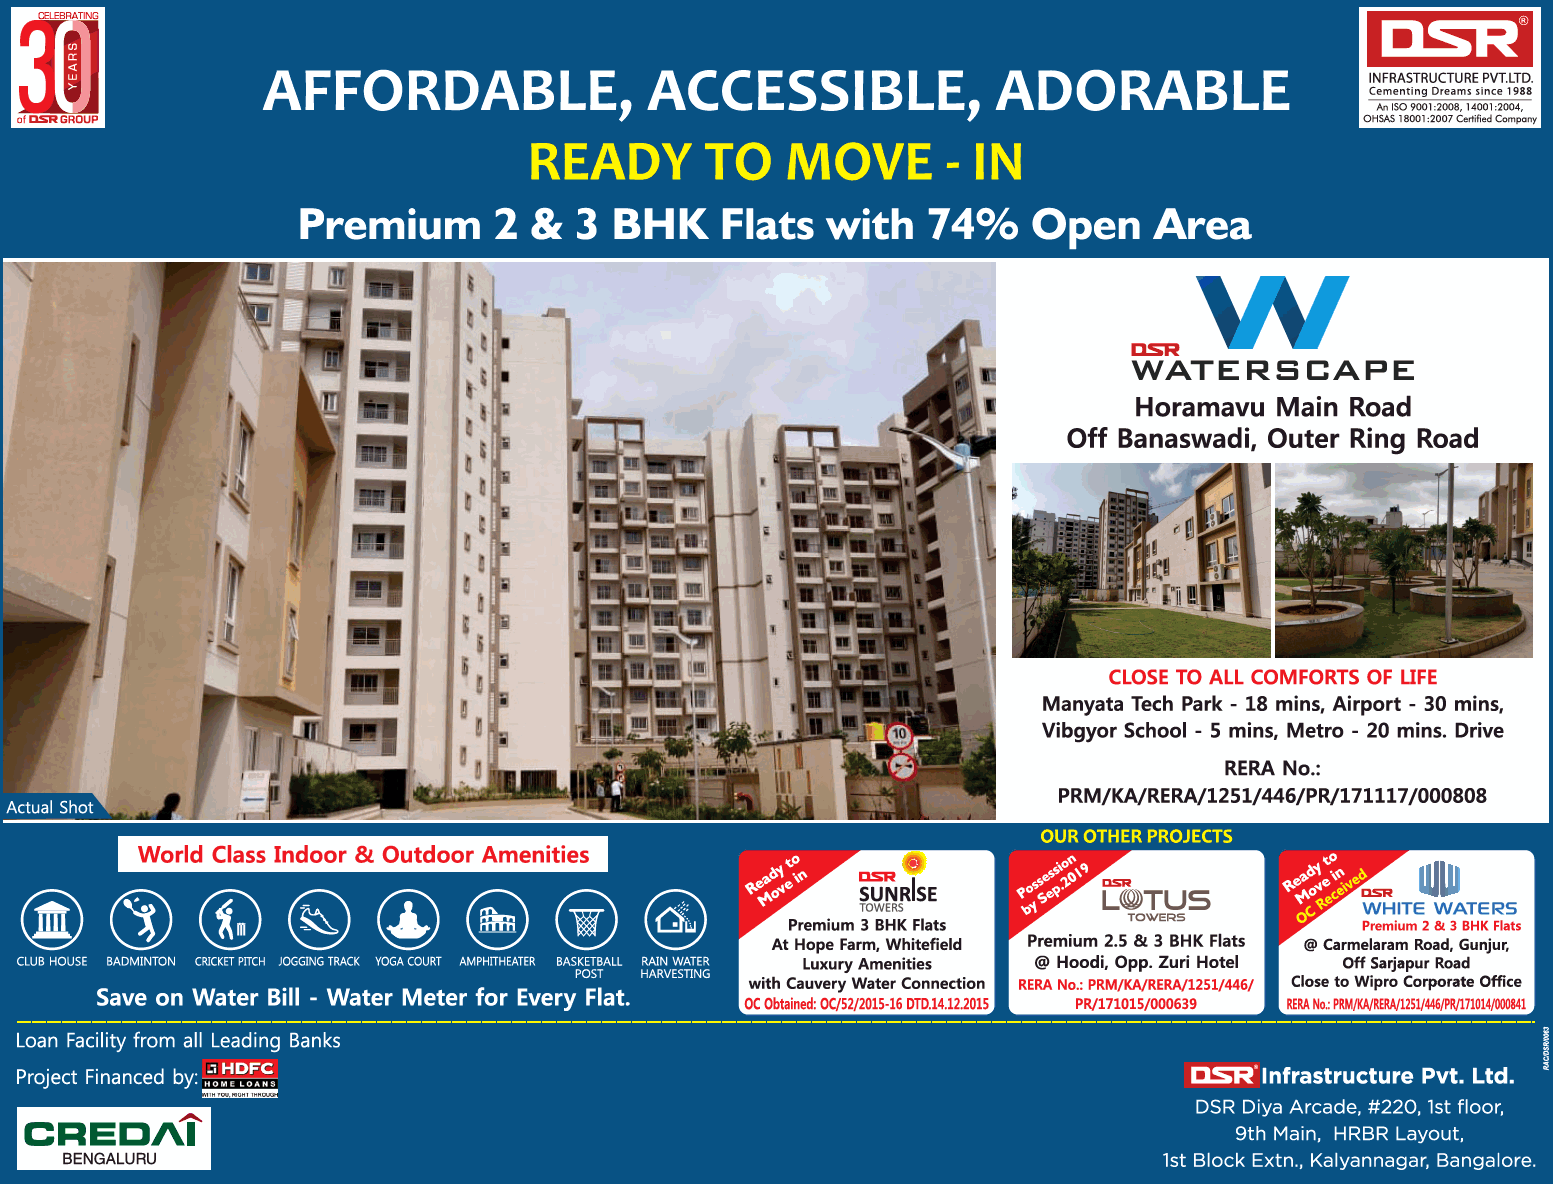 DSR Waterscape premium 2 & 3 bhk flats with 74% open area in Bangalore